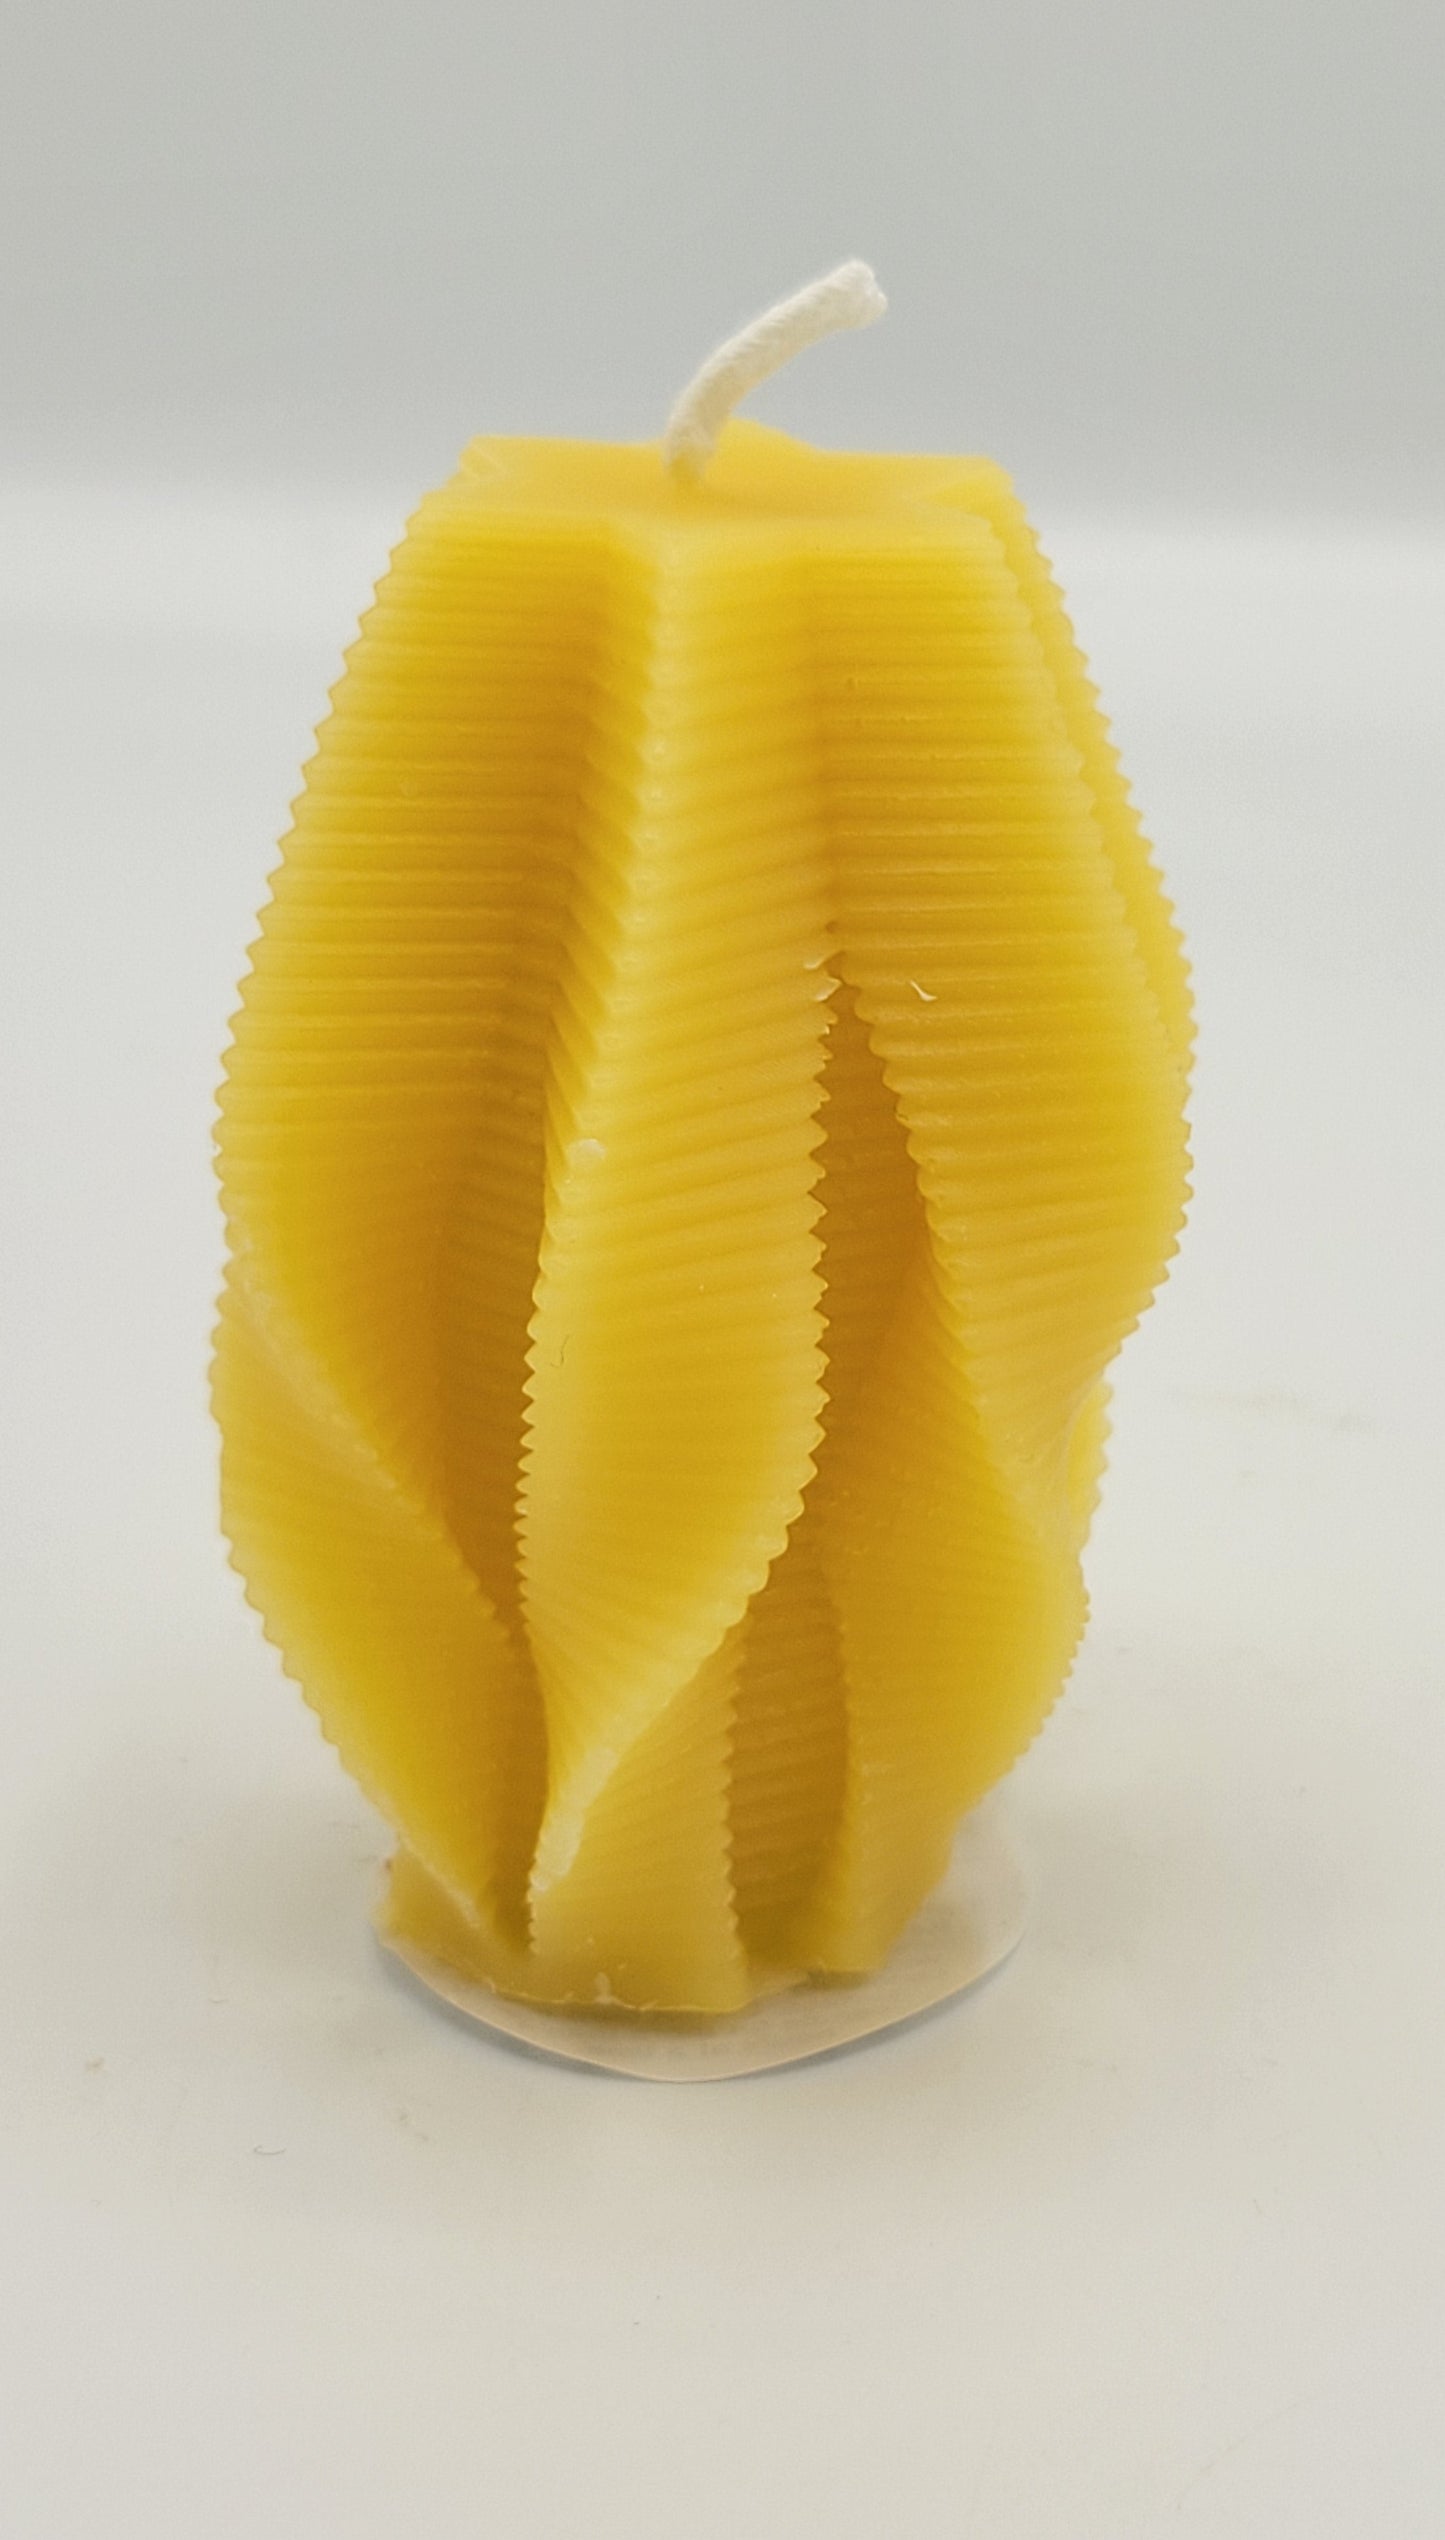 100% Beeswax Candles - Fun Shapes